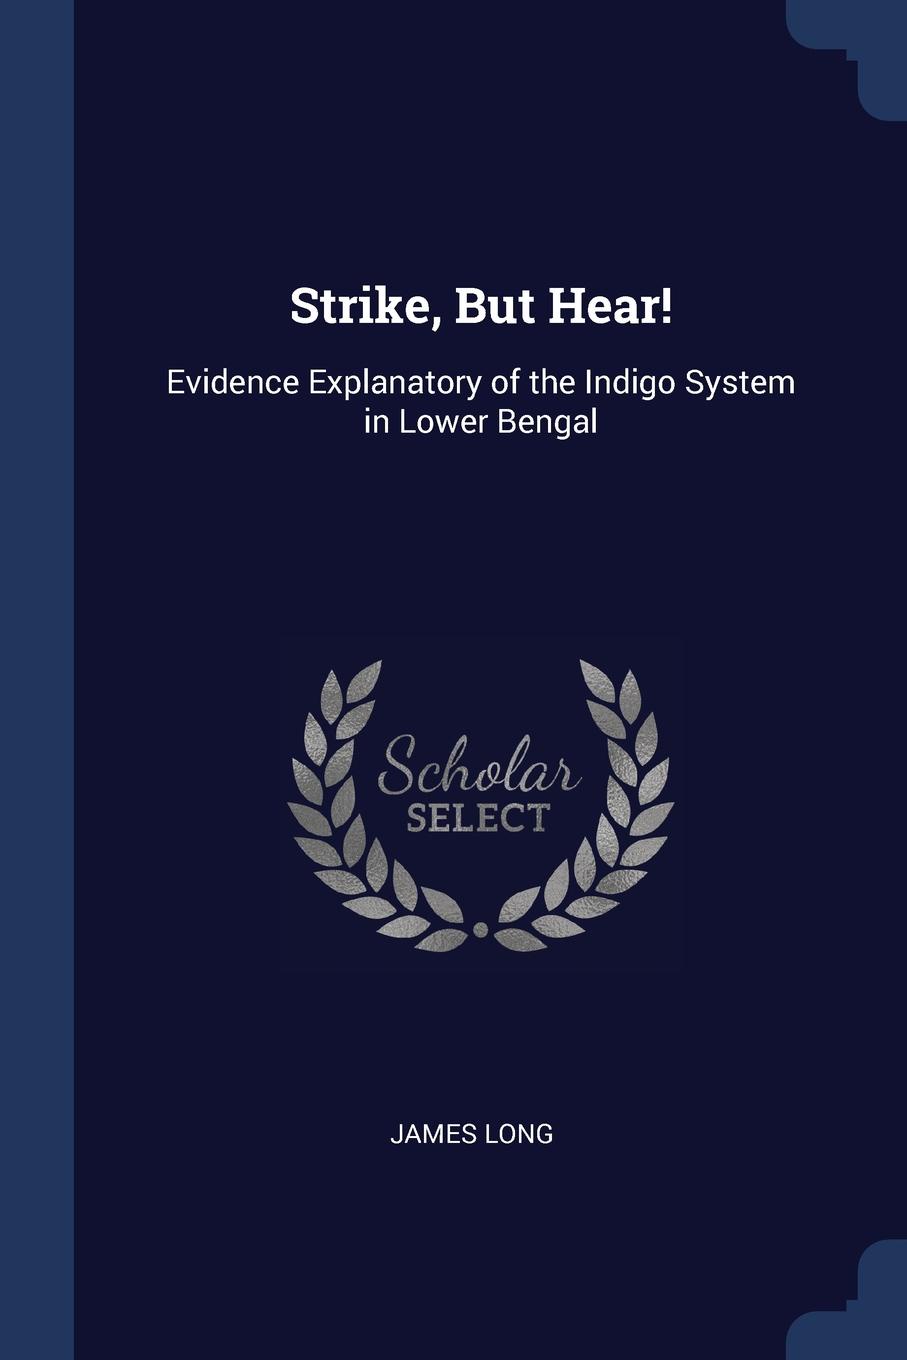 Strike, But Hear.. Evidence Explanatory of the Indigo System in Lower Bengal